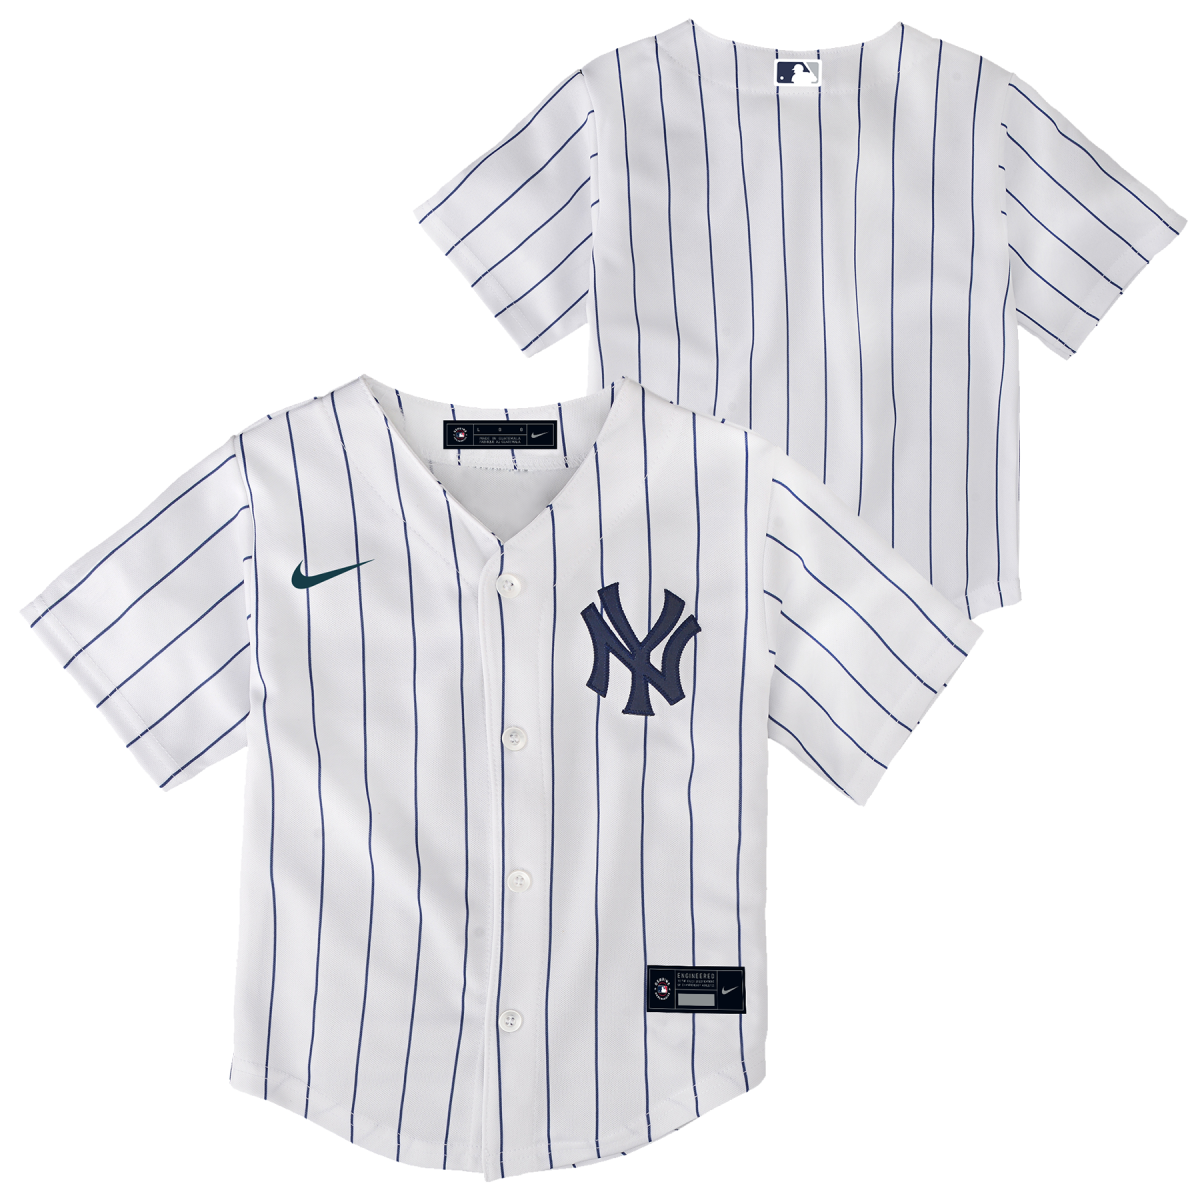  Outerstuff Aaron Judge #99 New York Yankees Home White Toddler  Jersey - Toddler (2T-4T) : Sports & Outdoors